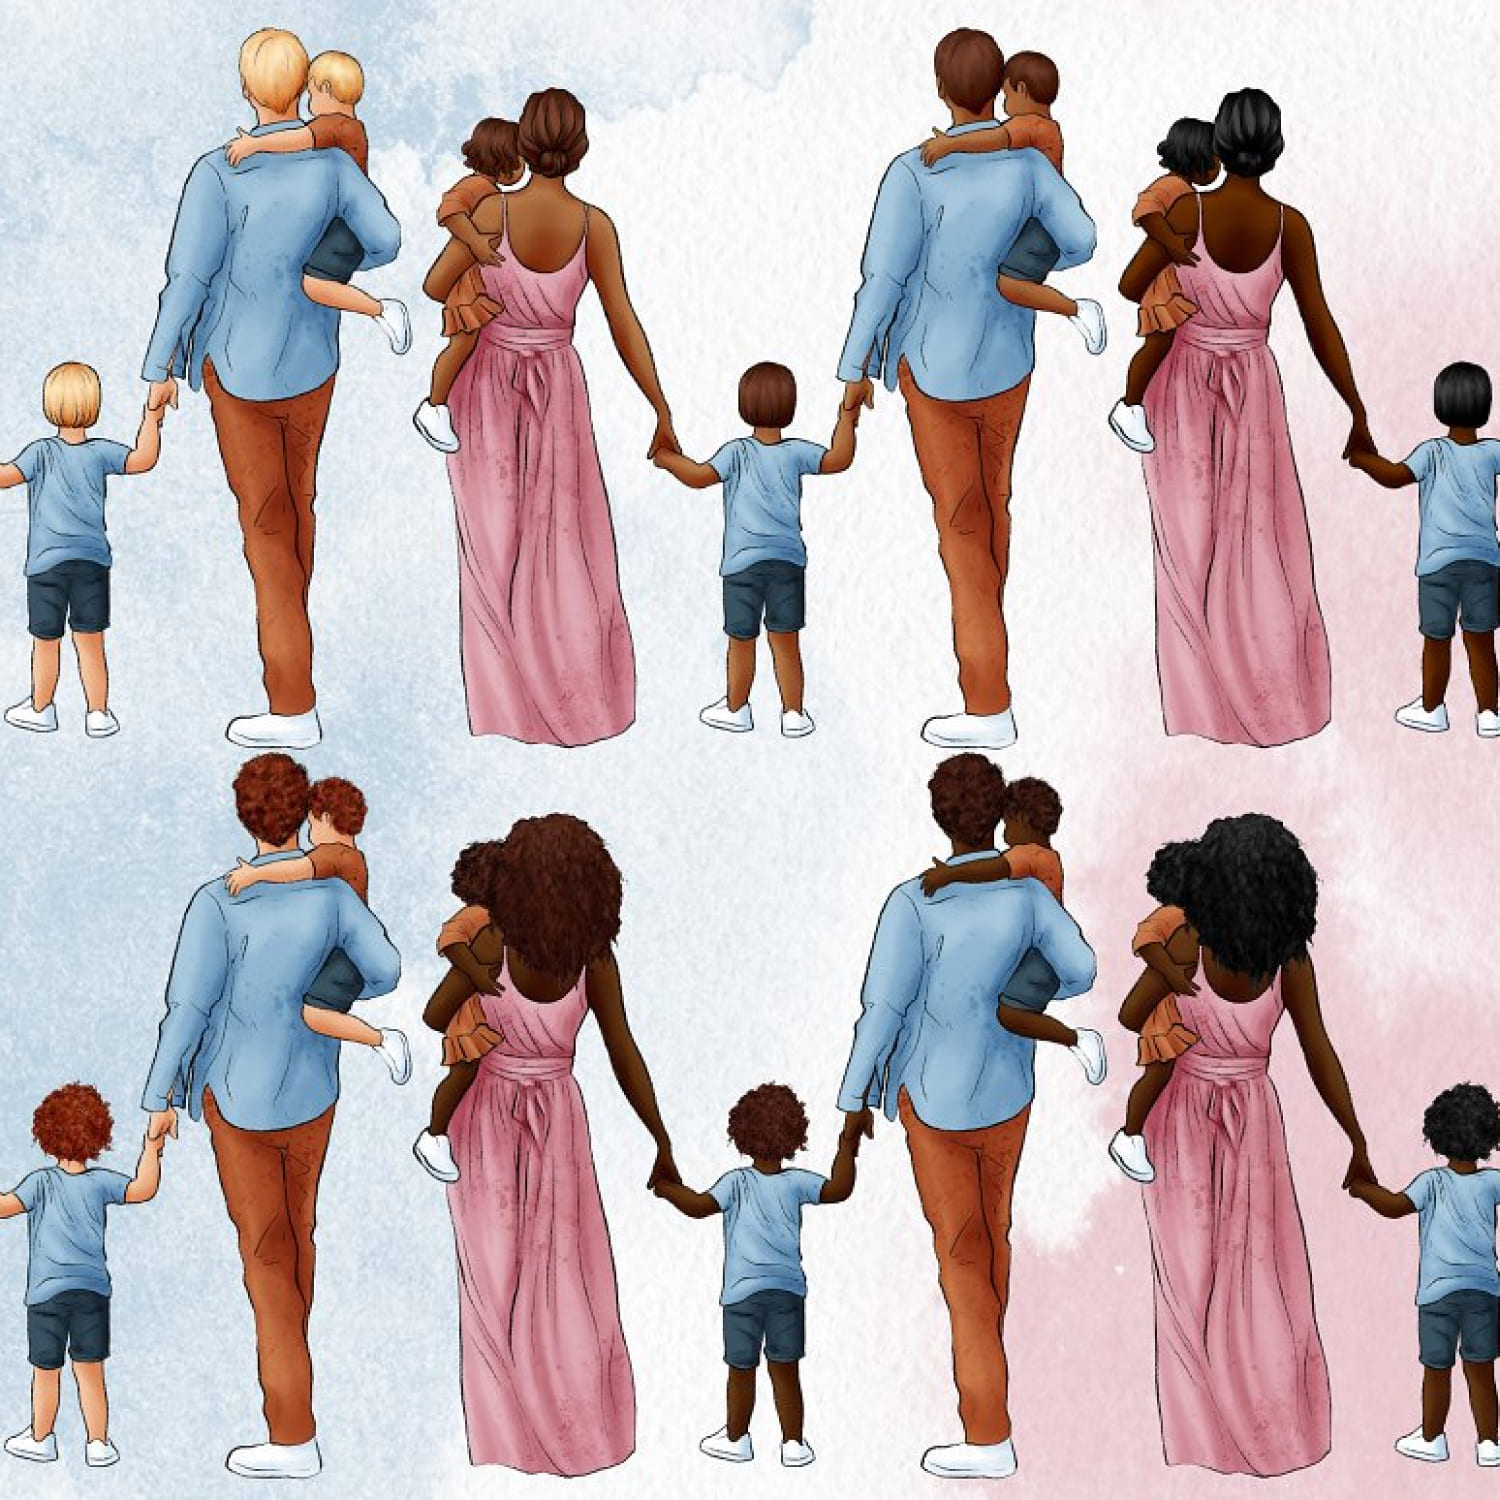 Several illustrations of a family with three children in light clothing.